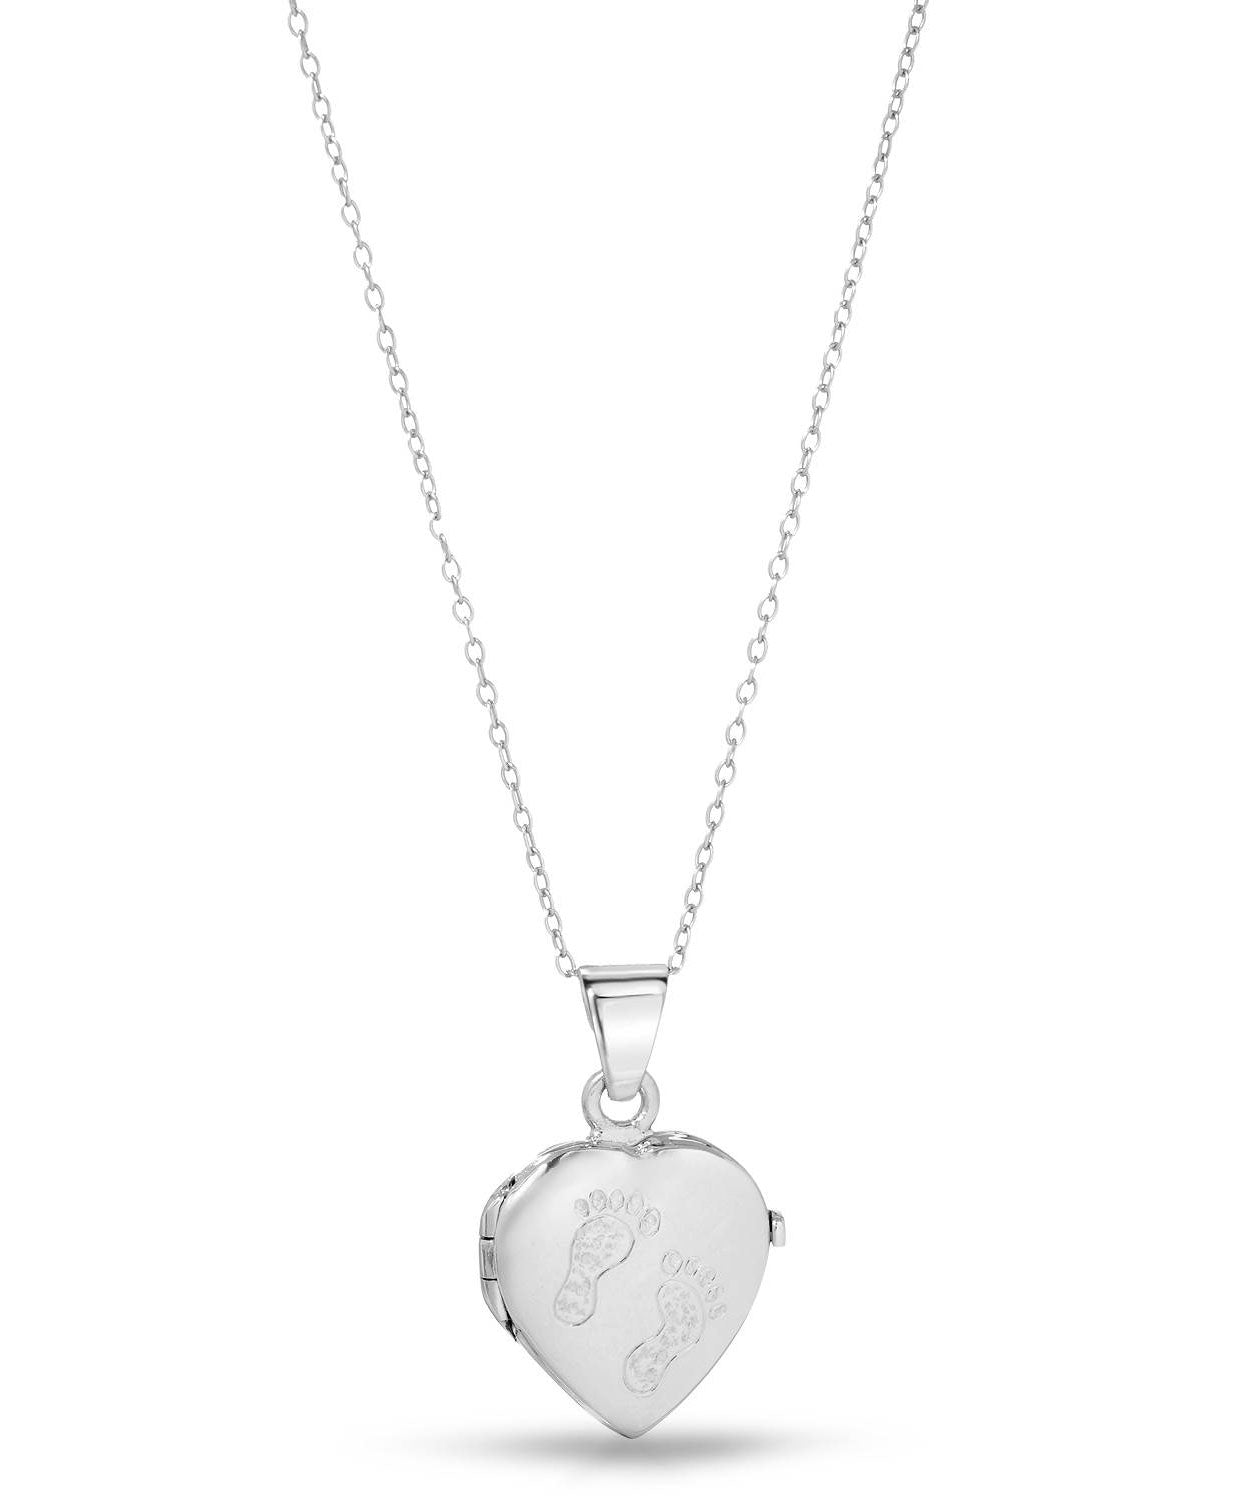 Rhodium Plated 925 Sterling Silver Heart Locket Pendant With Chain - Made in Italy View 1